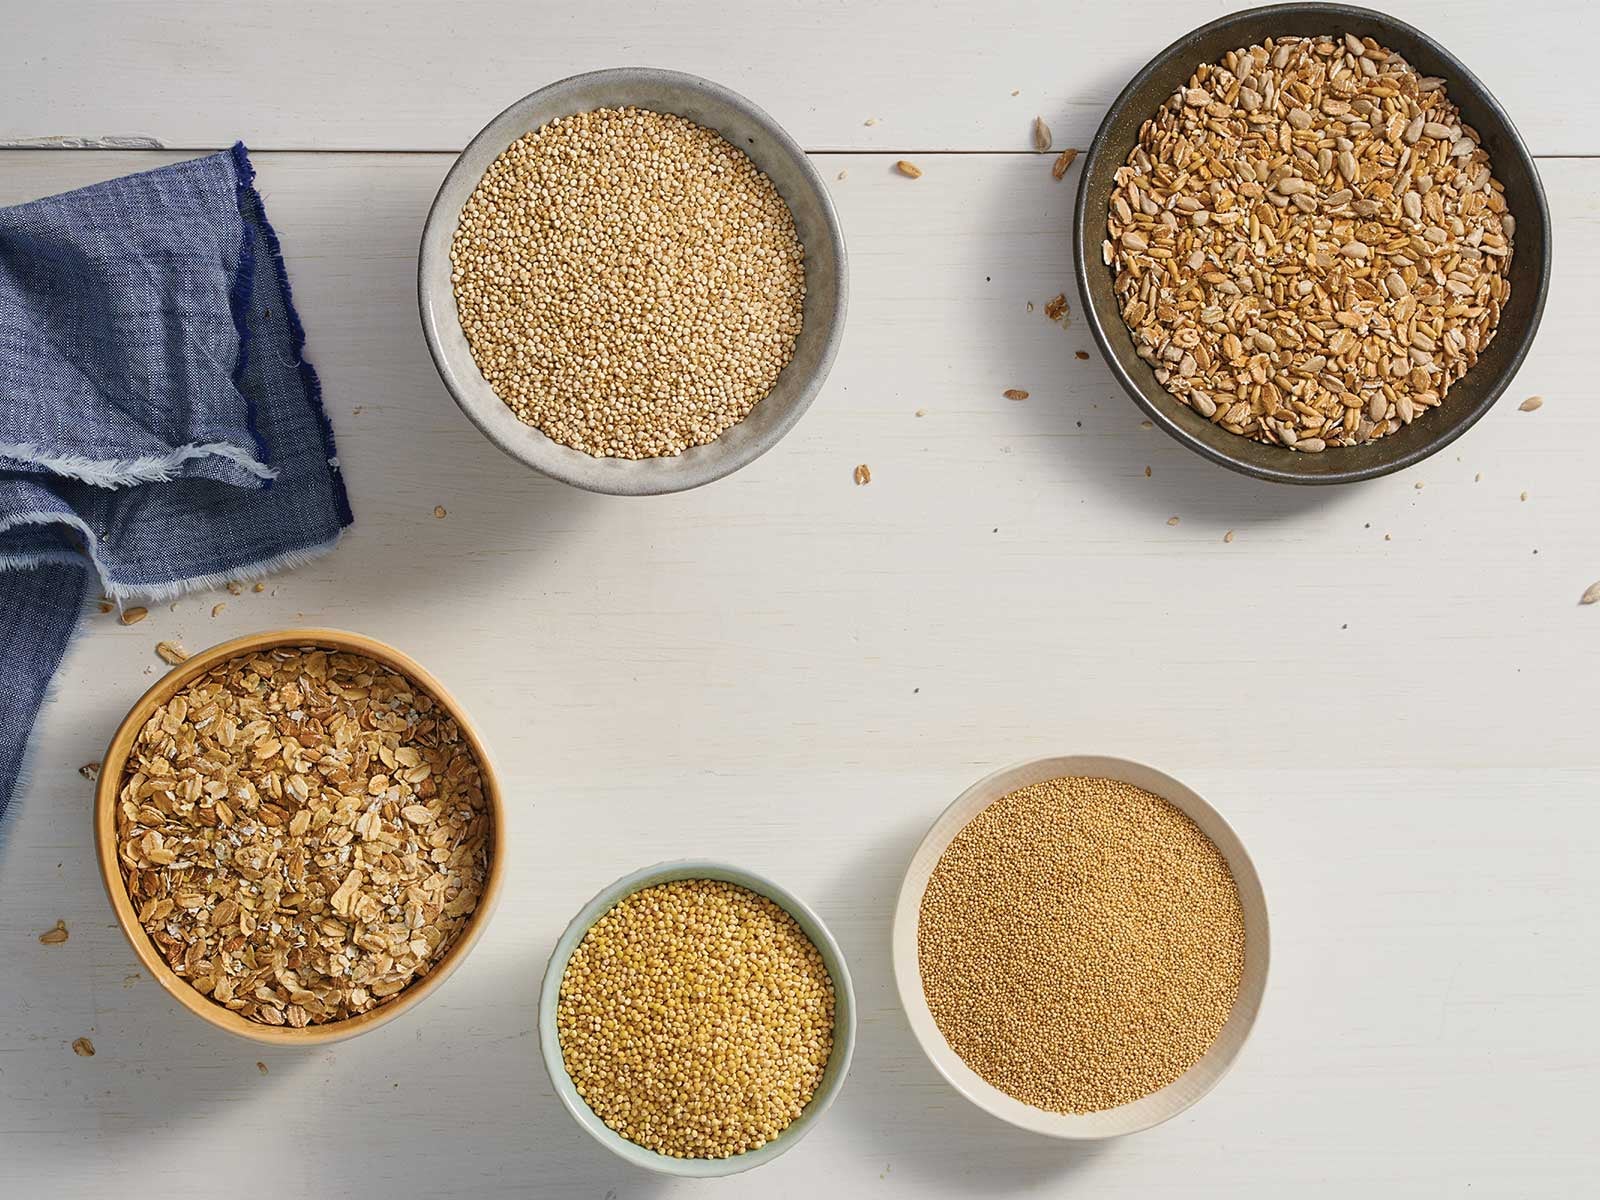 Bowls with different grains from Harvest Grains Blend